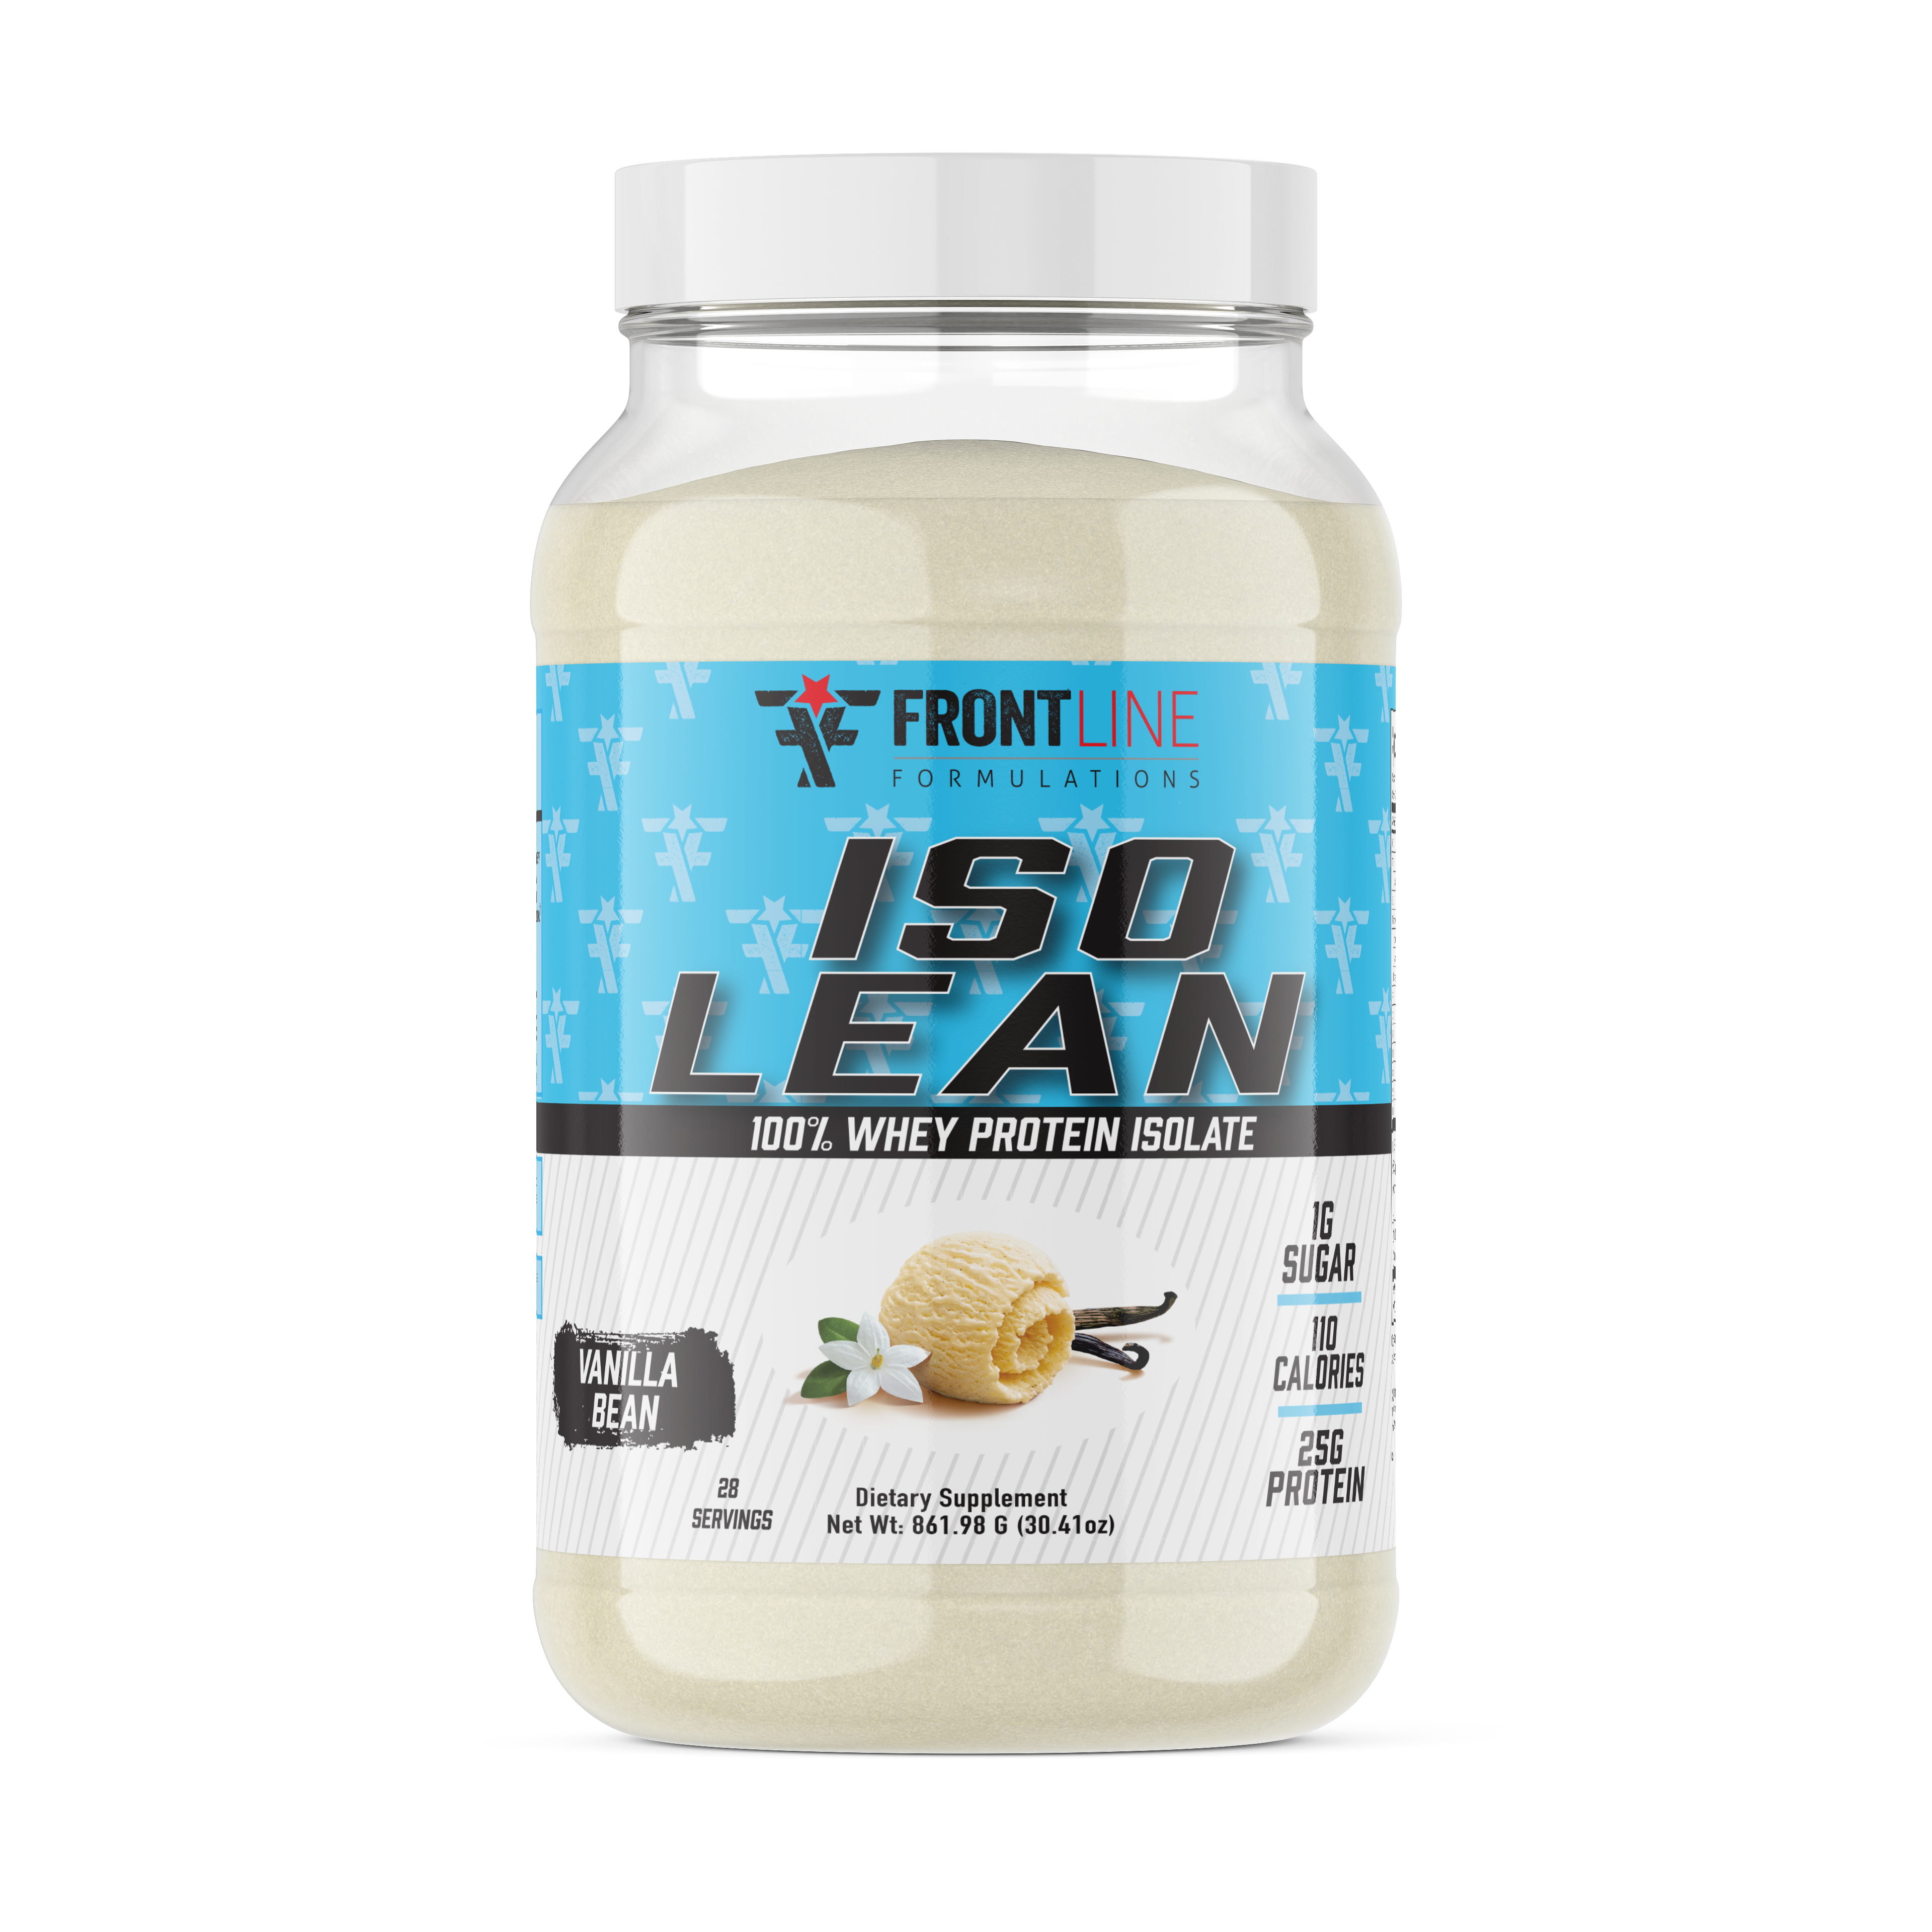 Whey Protein Isolate Ever heard the phrase: "You can't have it all?" Well Frontline wanted to test that with Iso Lean. Let's cut to what you really wanna know! Is it clean? Easily one of the cleanest! Frontline uses Provon®292 SFL Isolate, which reduces t